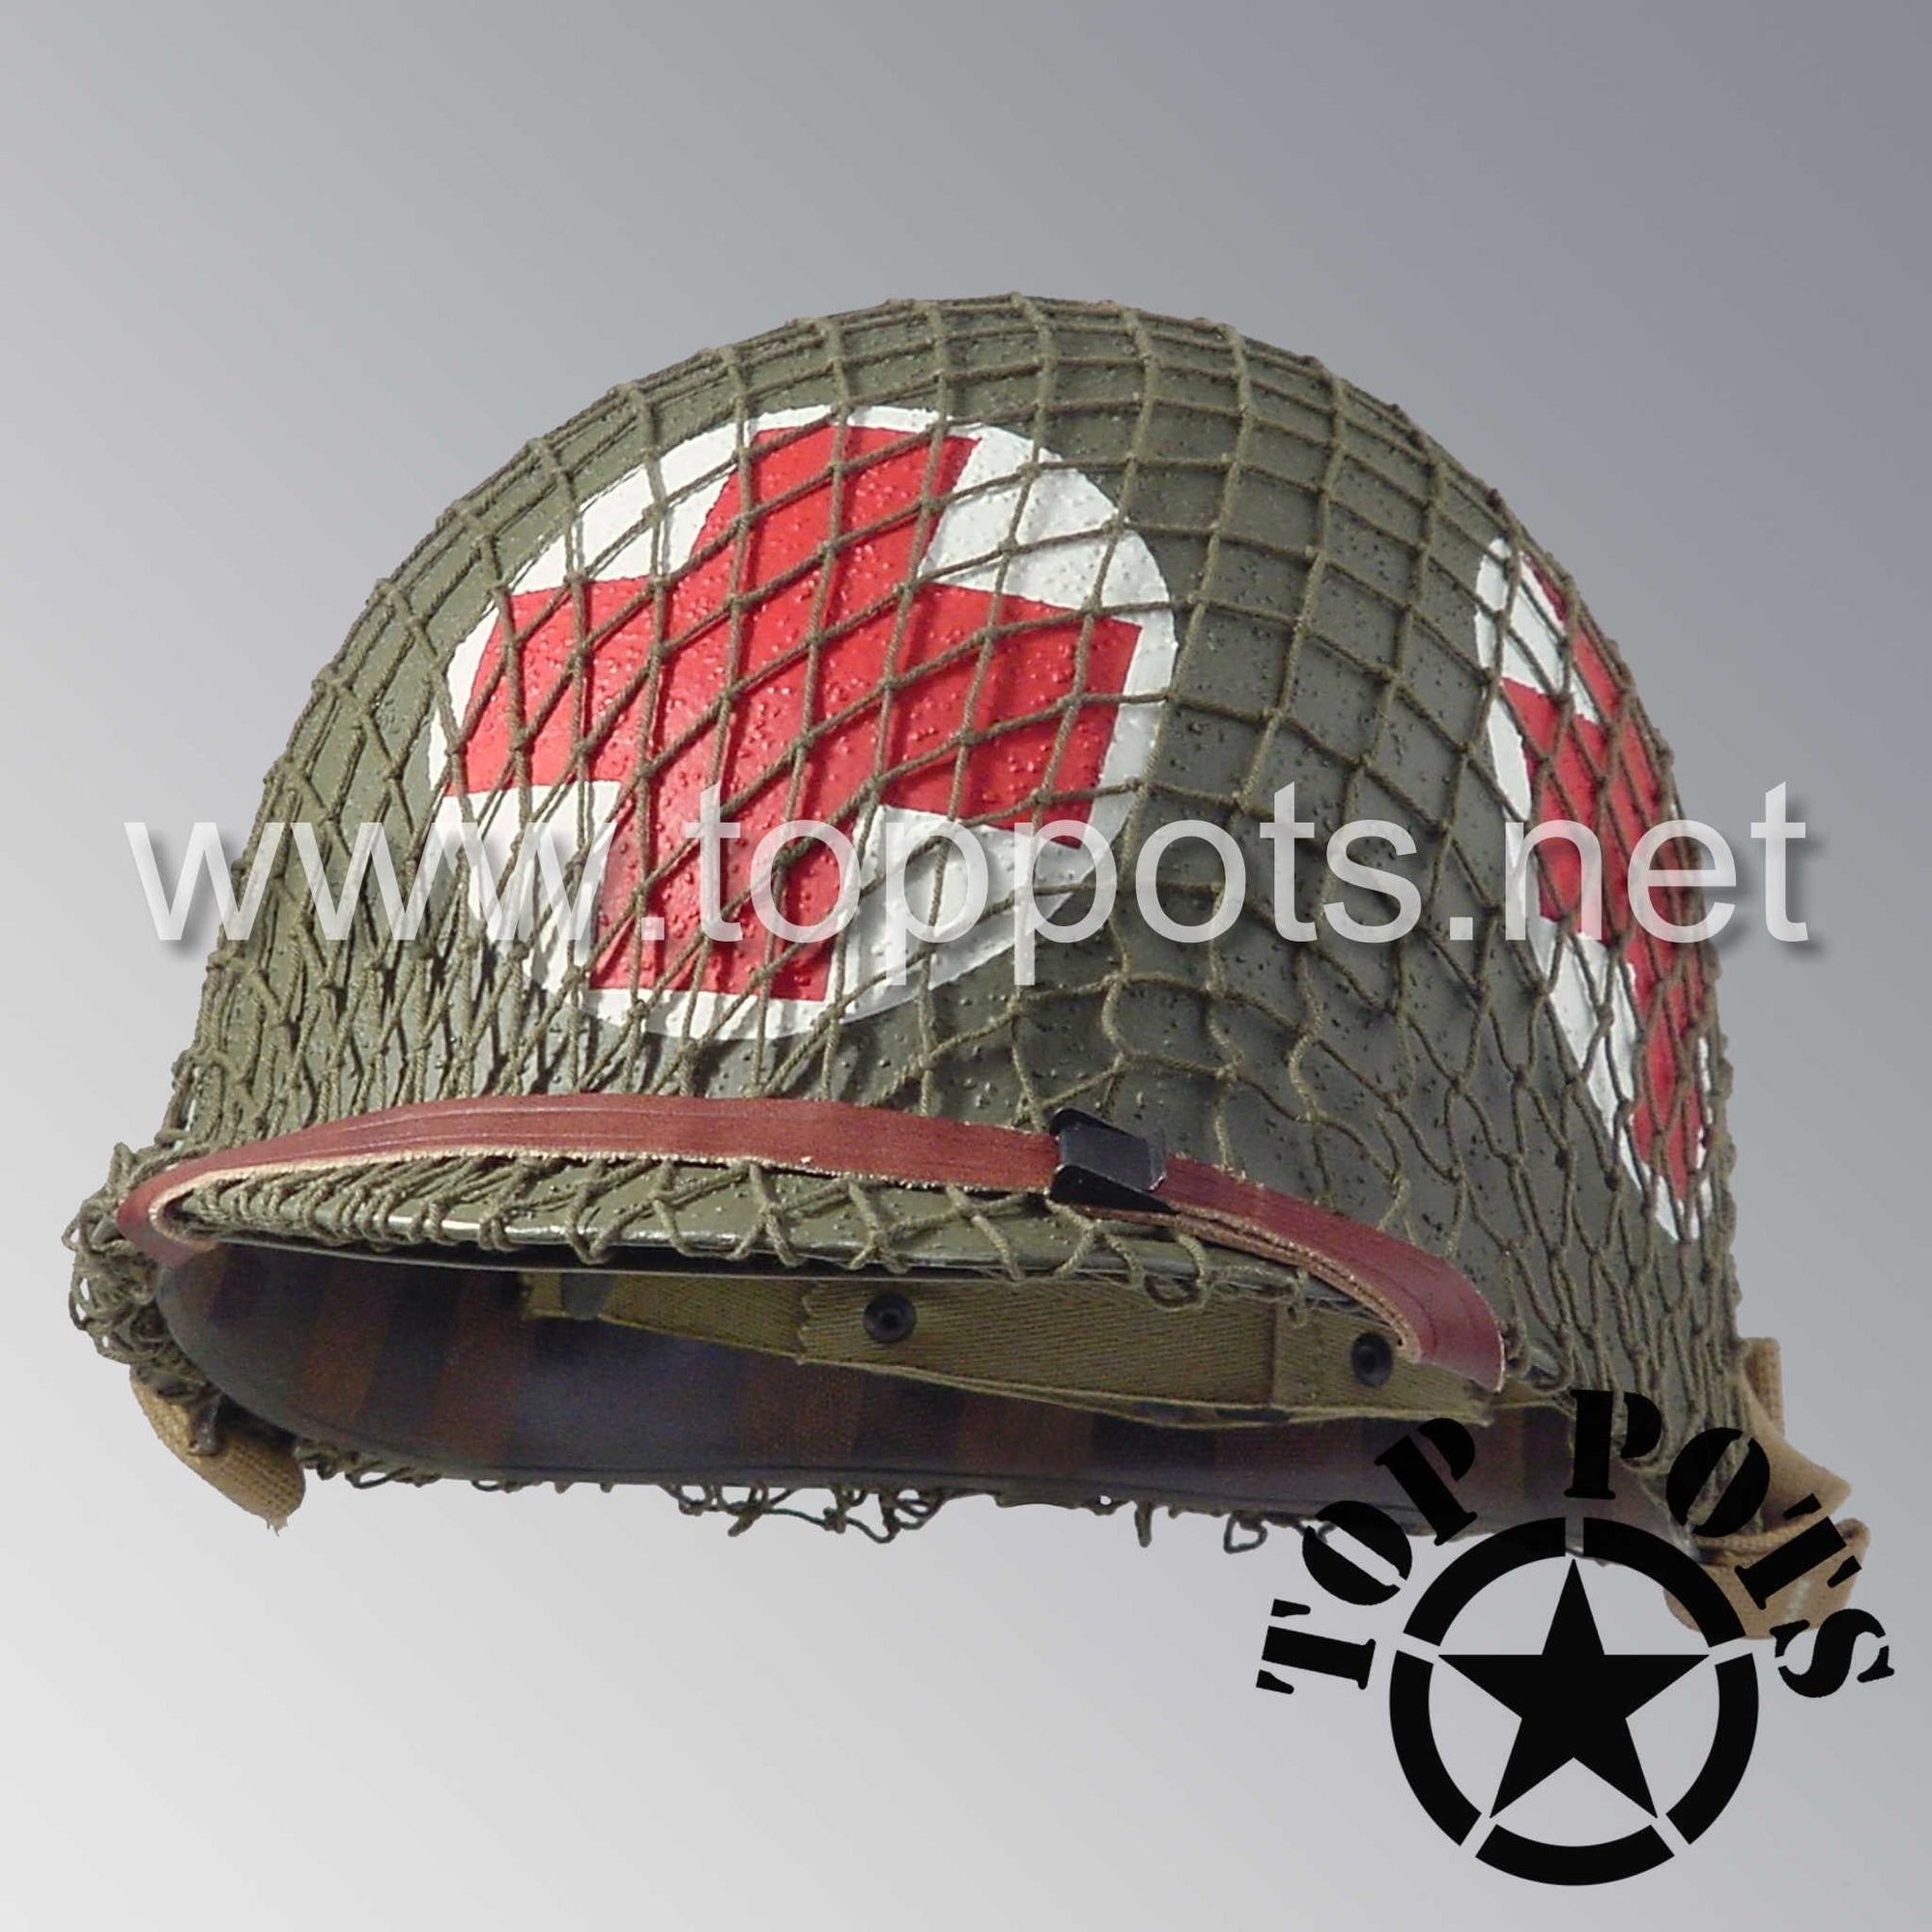 WWII US Army Restored Original M1 Infantry Helmet Swivel Bale Shell and Liner with Four Panel Medic Emblem with OD 7 Net